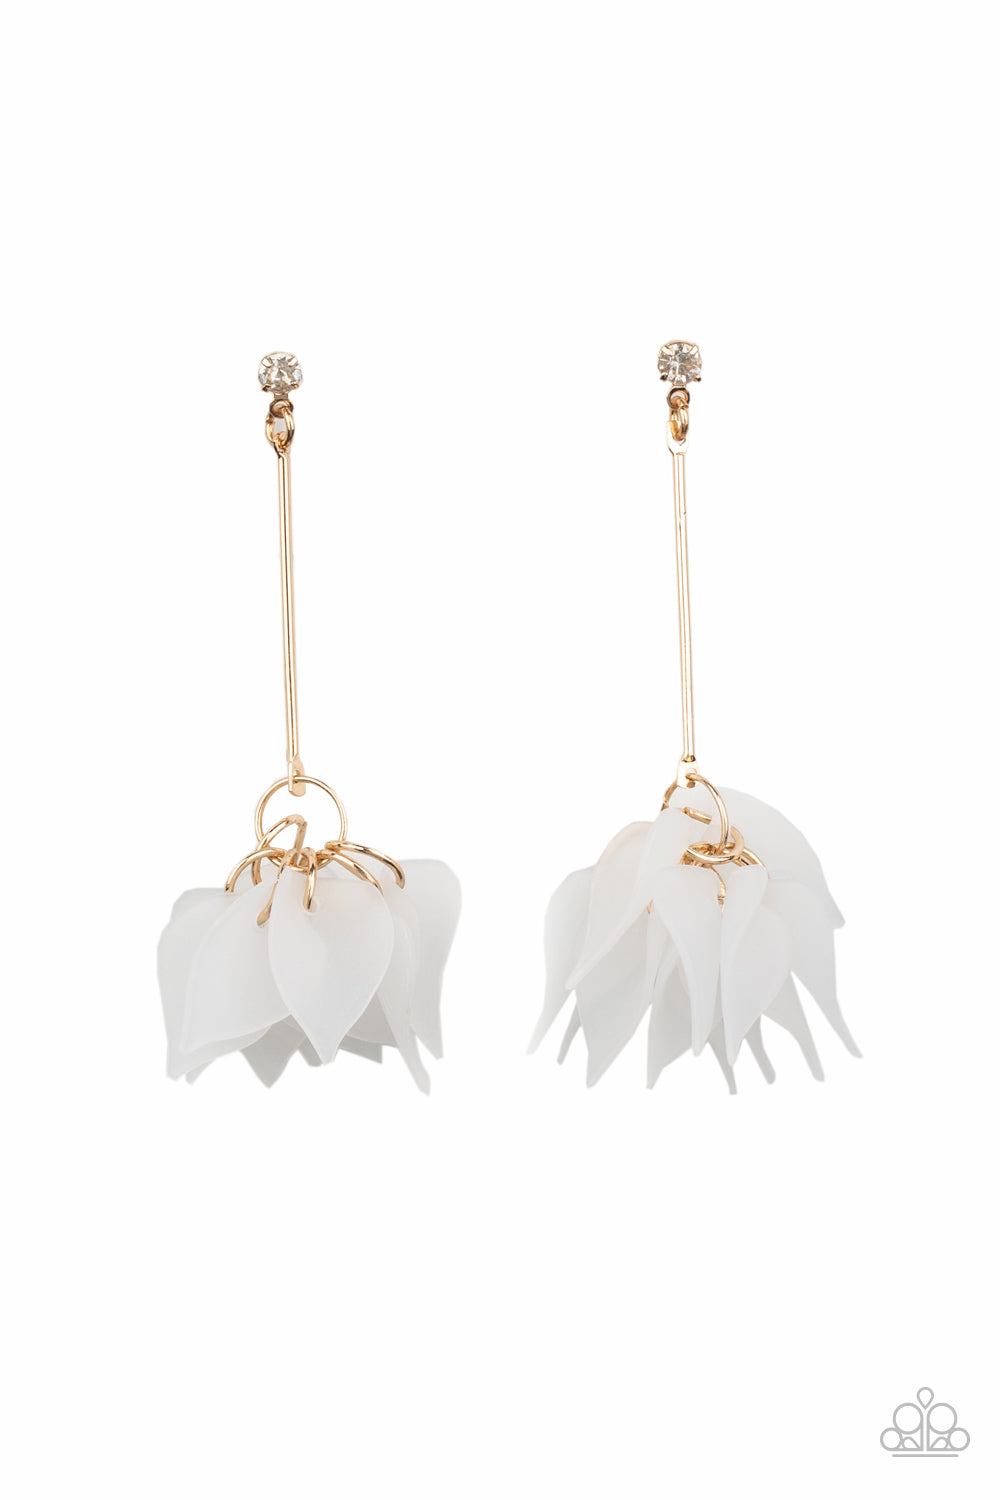 Paparazzi Accessories Suspended In Time - Gold Earrings - Lady T Accessories